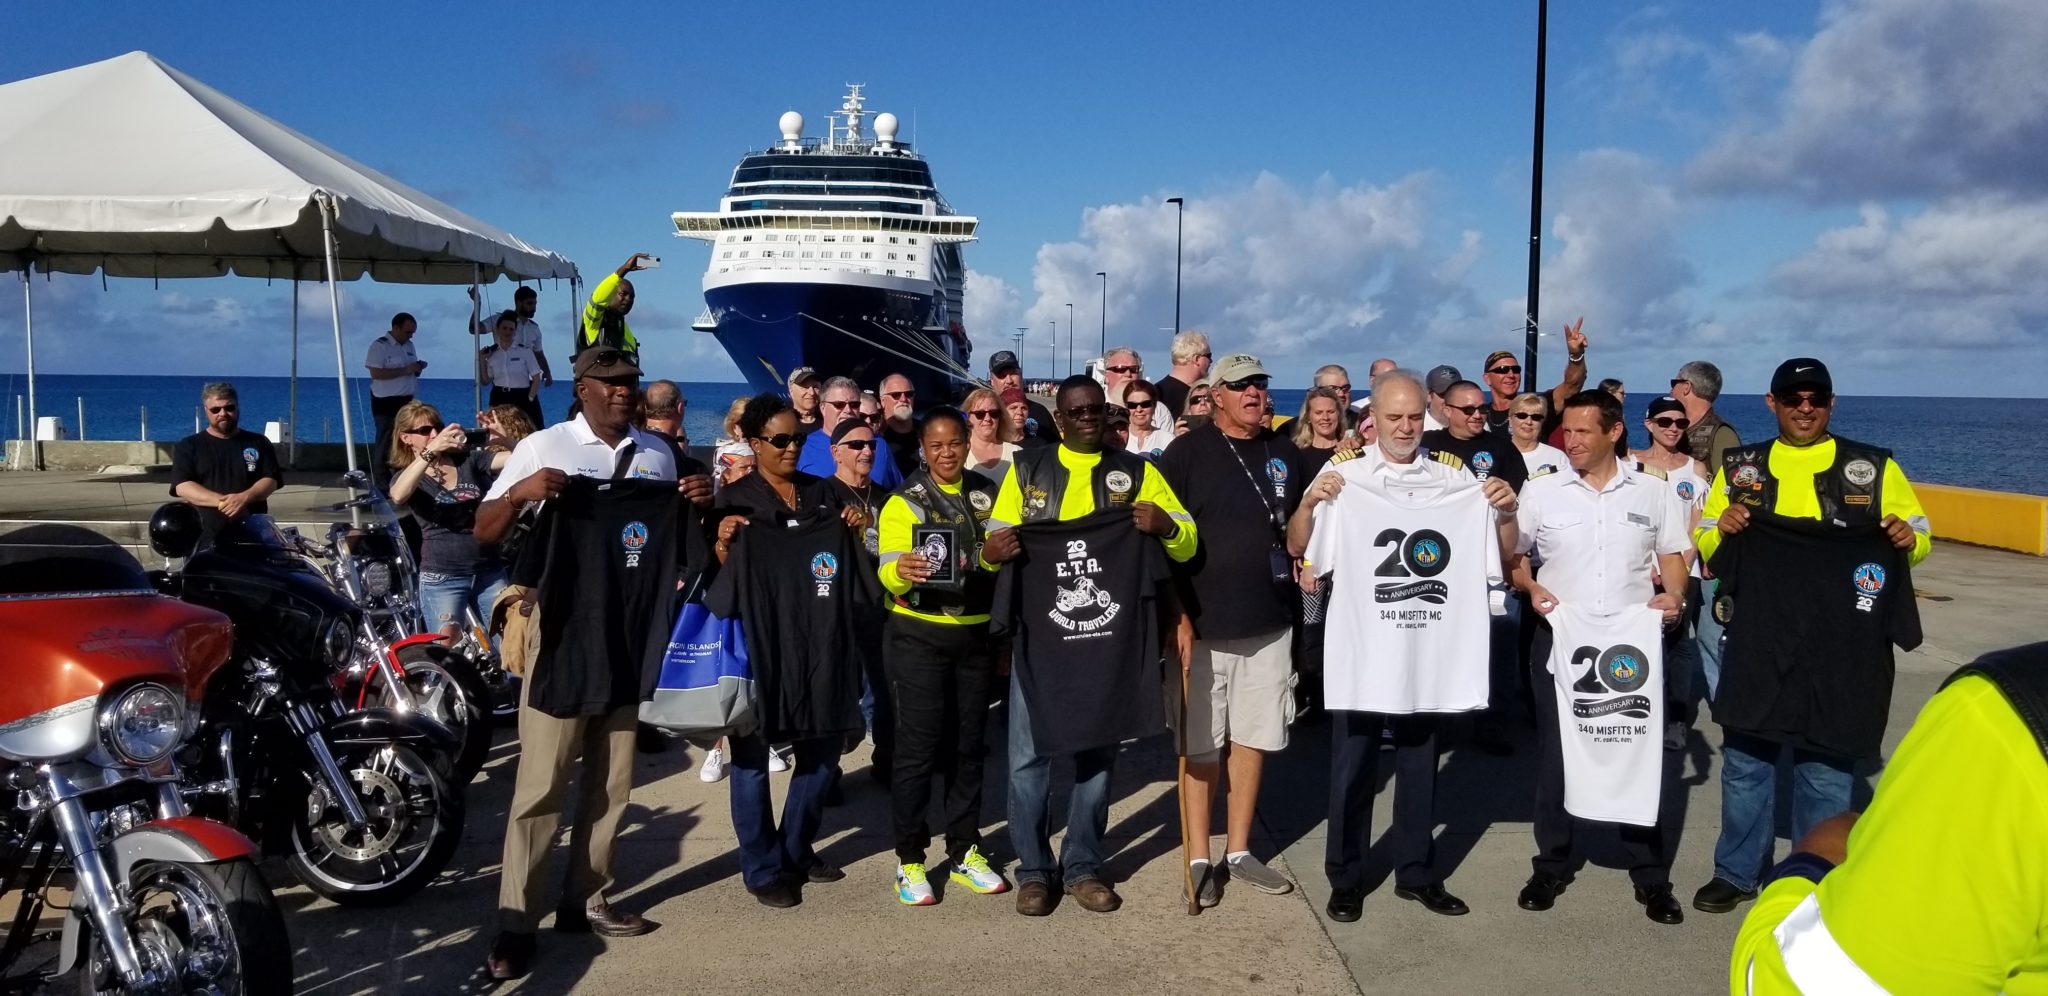 The ETA Motorcycles Cruises group in Frederksted on Wednesday. (Photo courtesy of Mark Finch)